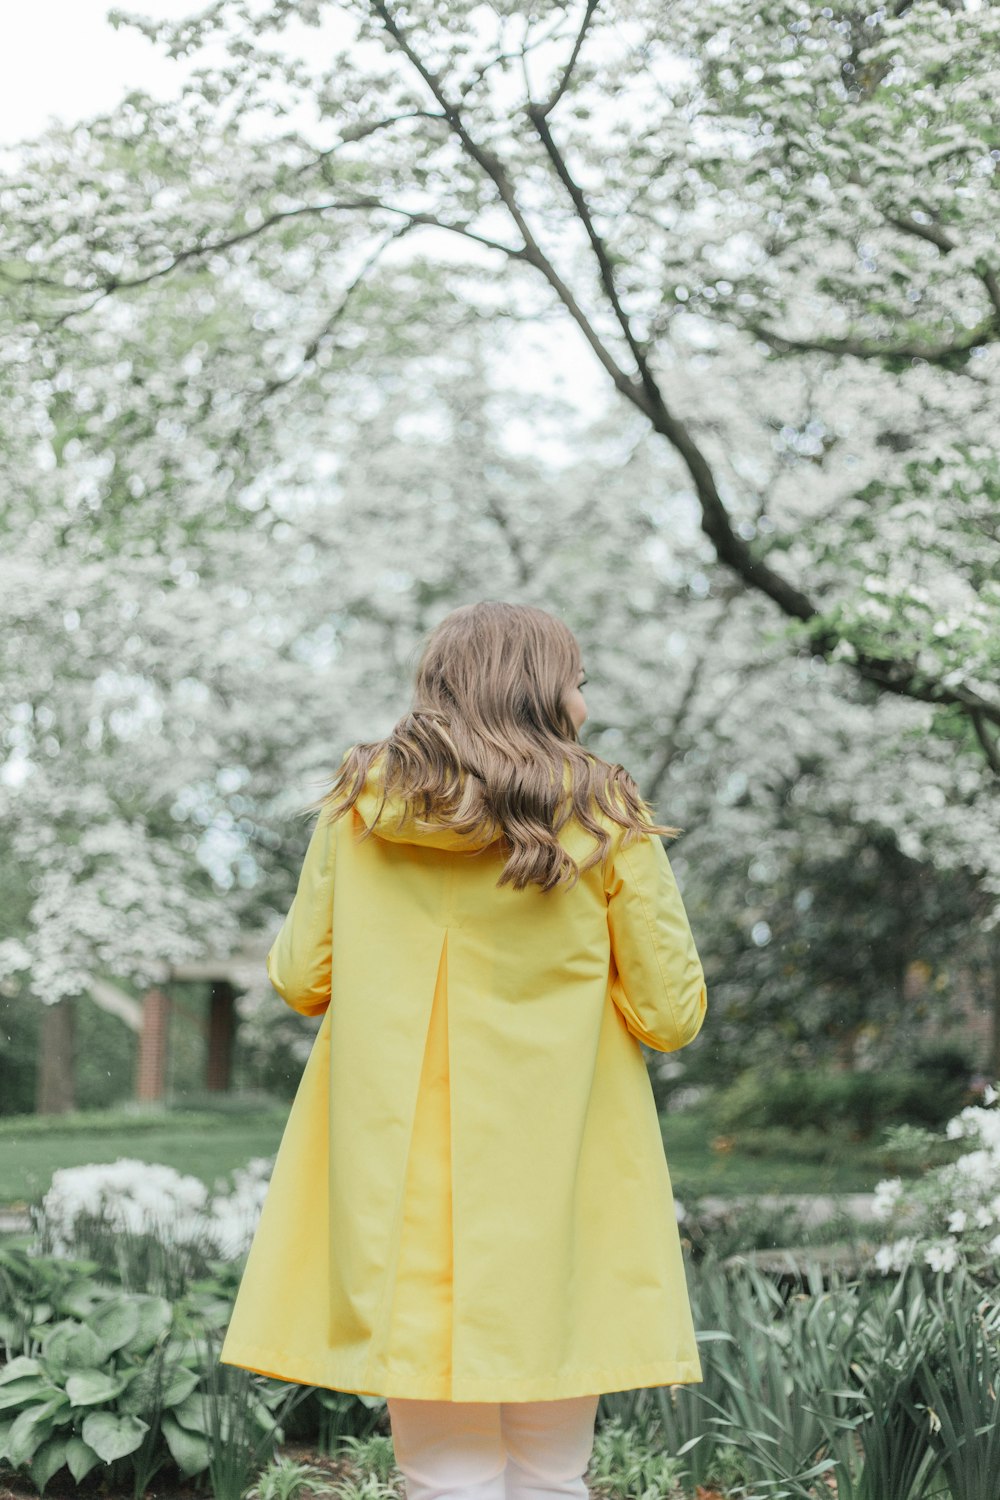 woman in yellow coat standing near trees during daytime